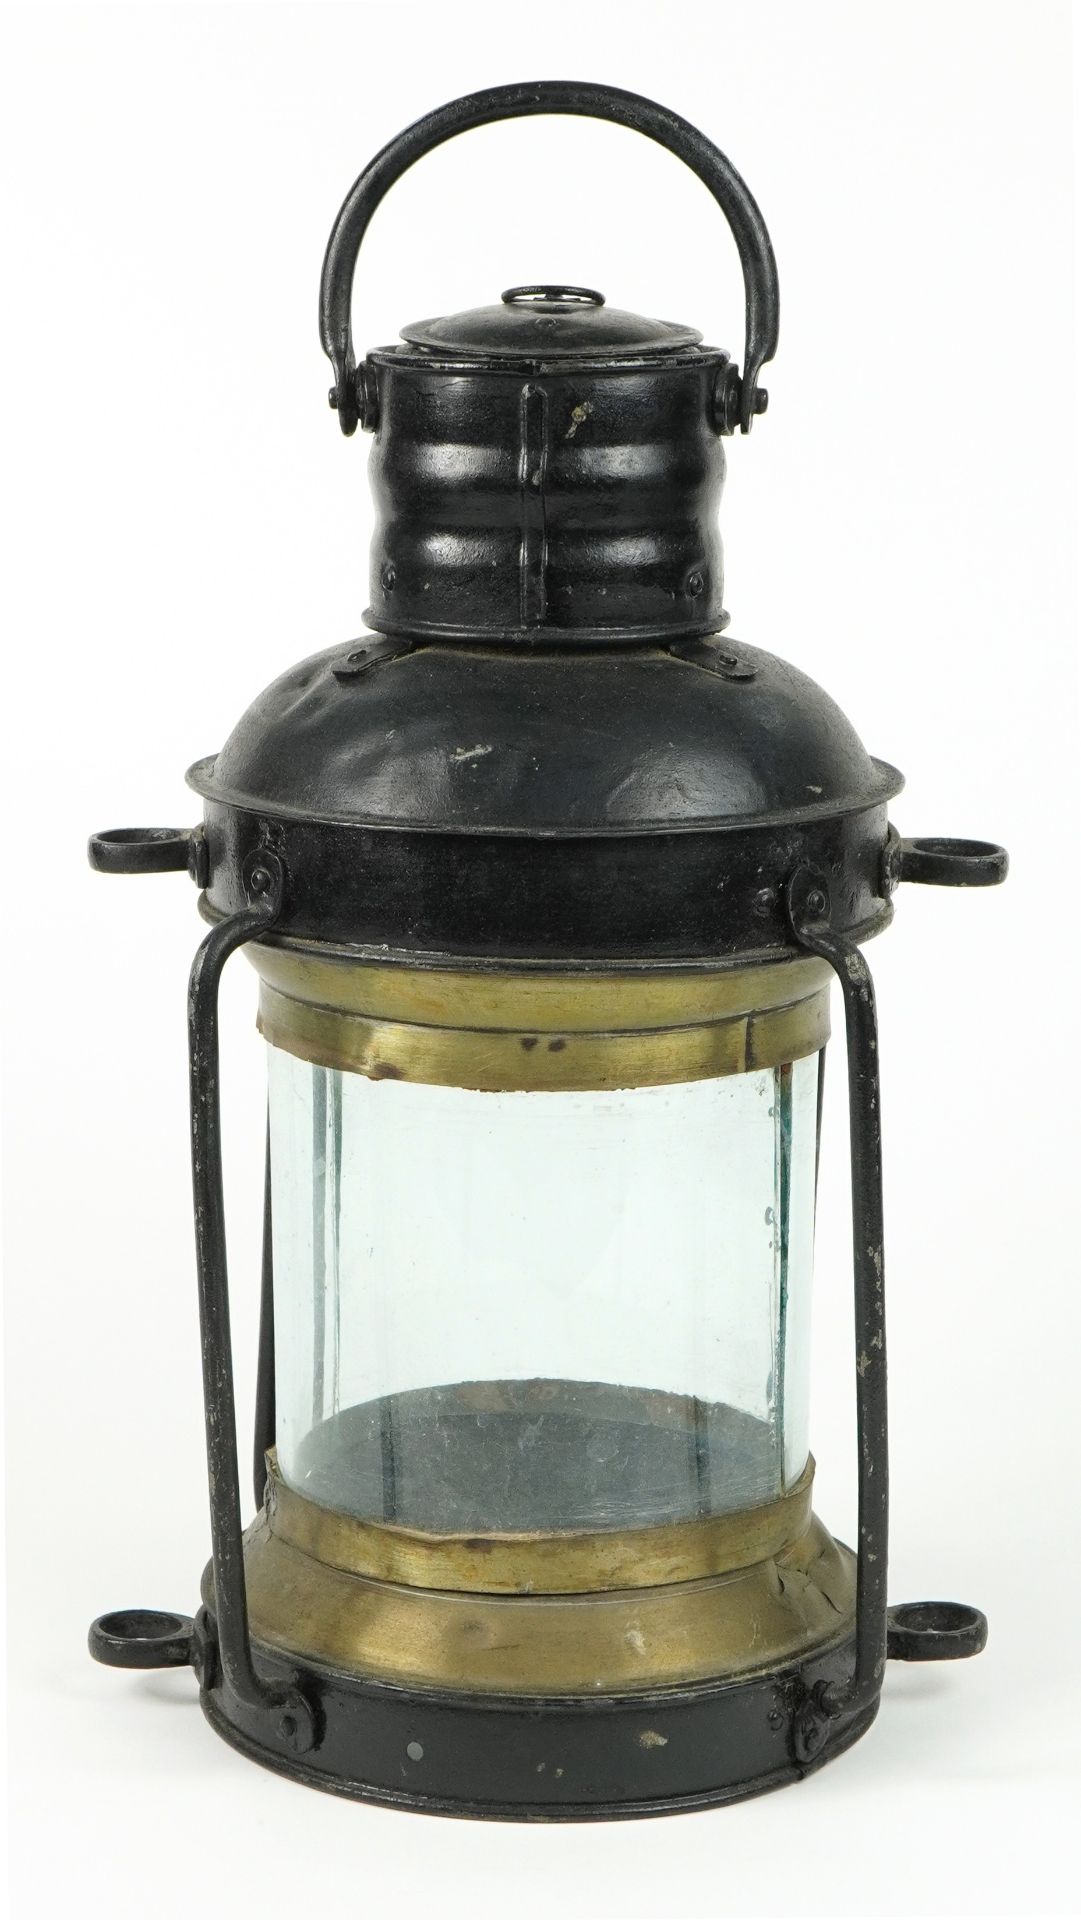 Antique shipping interest ship's hanging lantern with glass panel, 42cm high excluding the handle